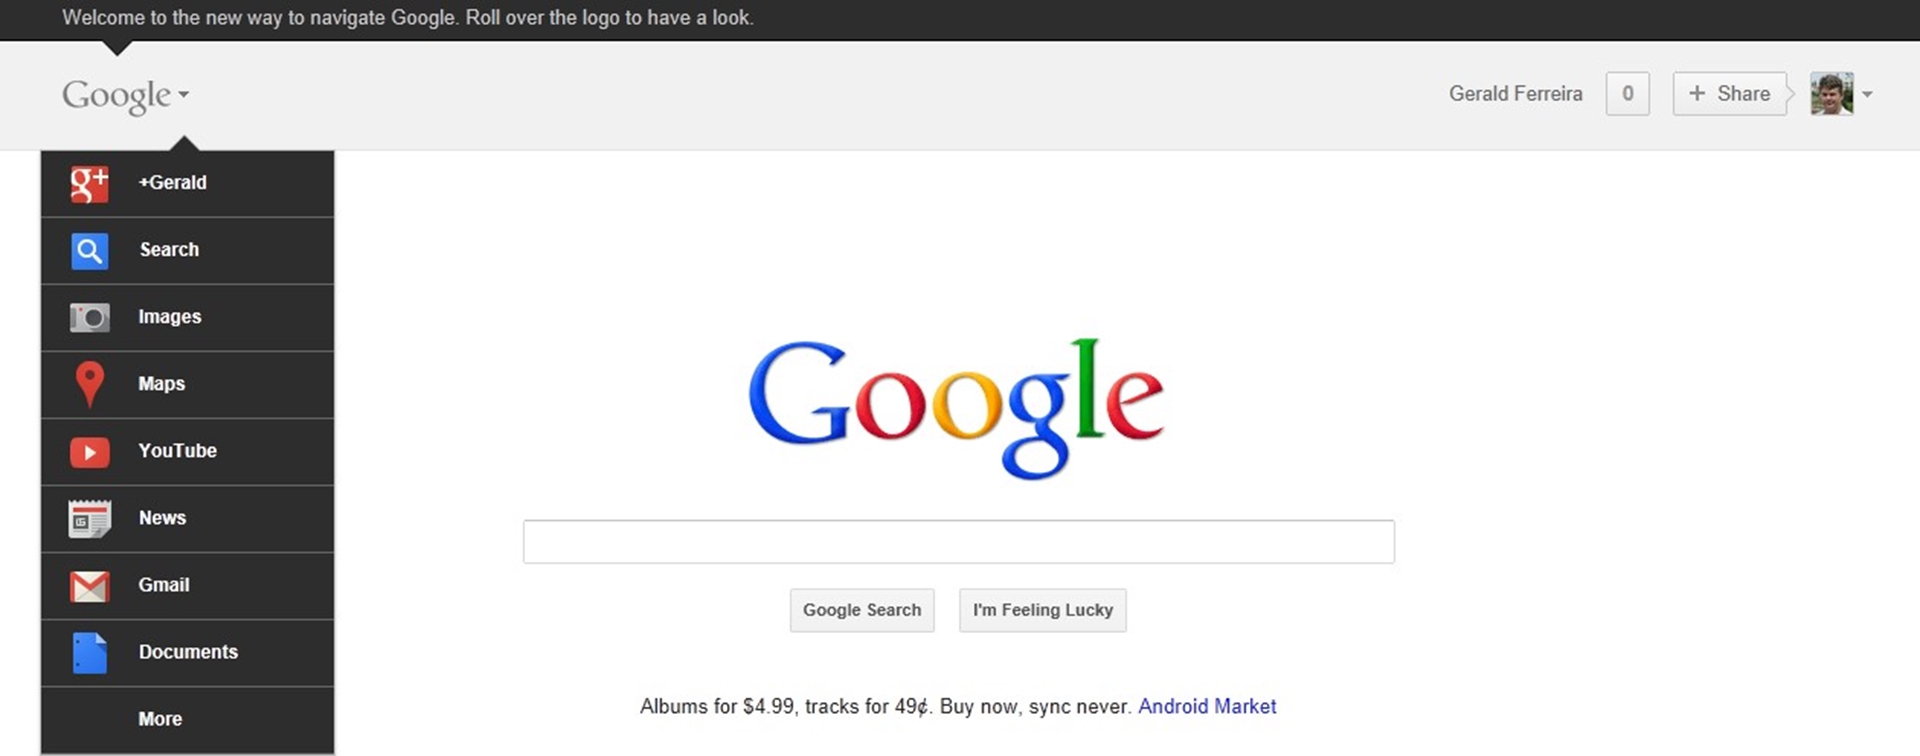 Welcome to the new way to navigate Google. Roll over the logo to have a look